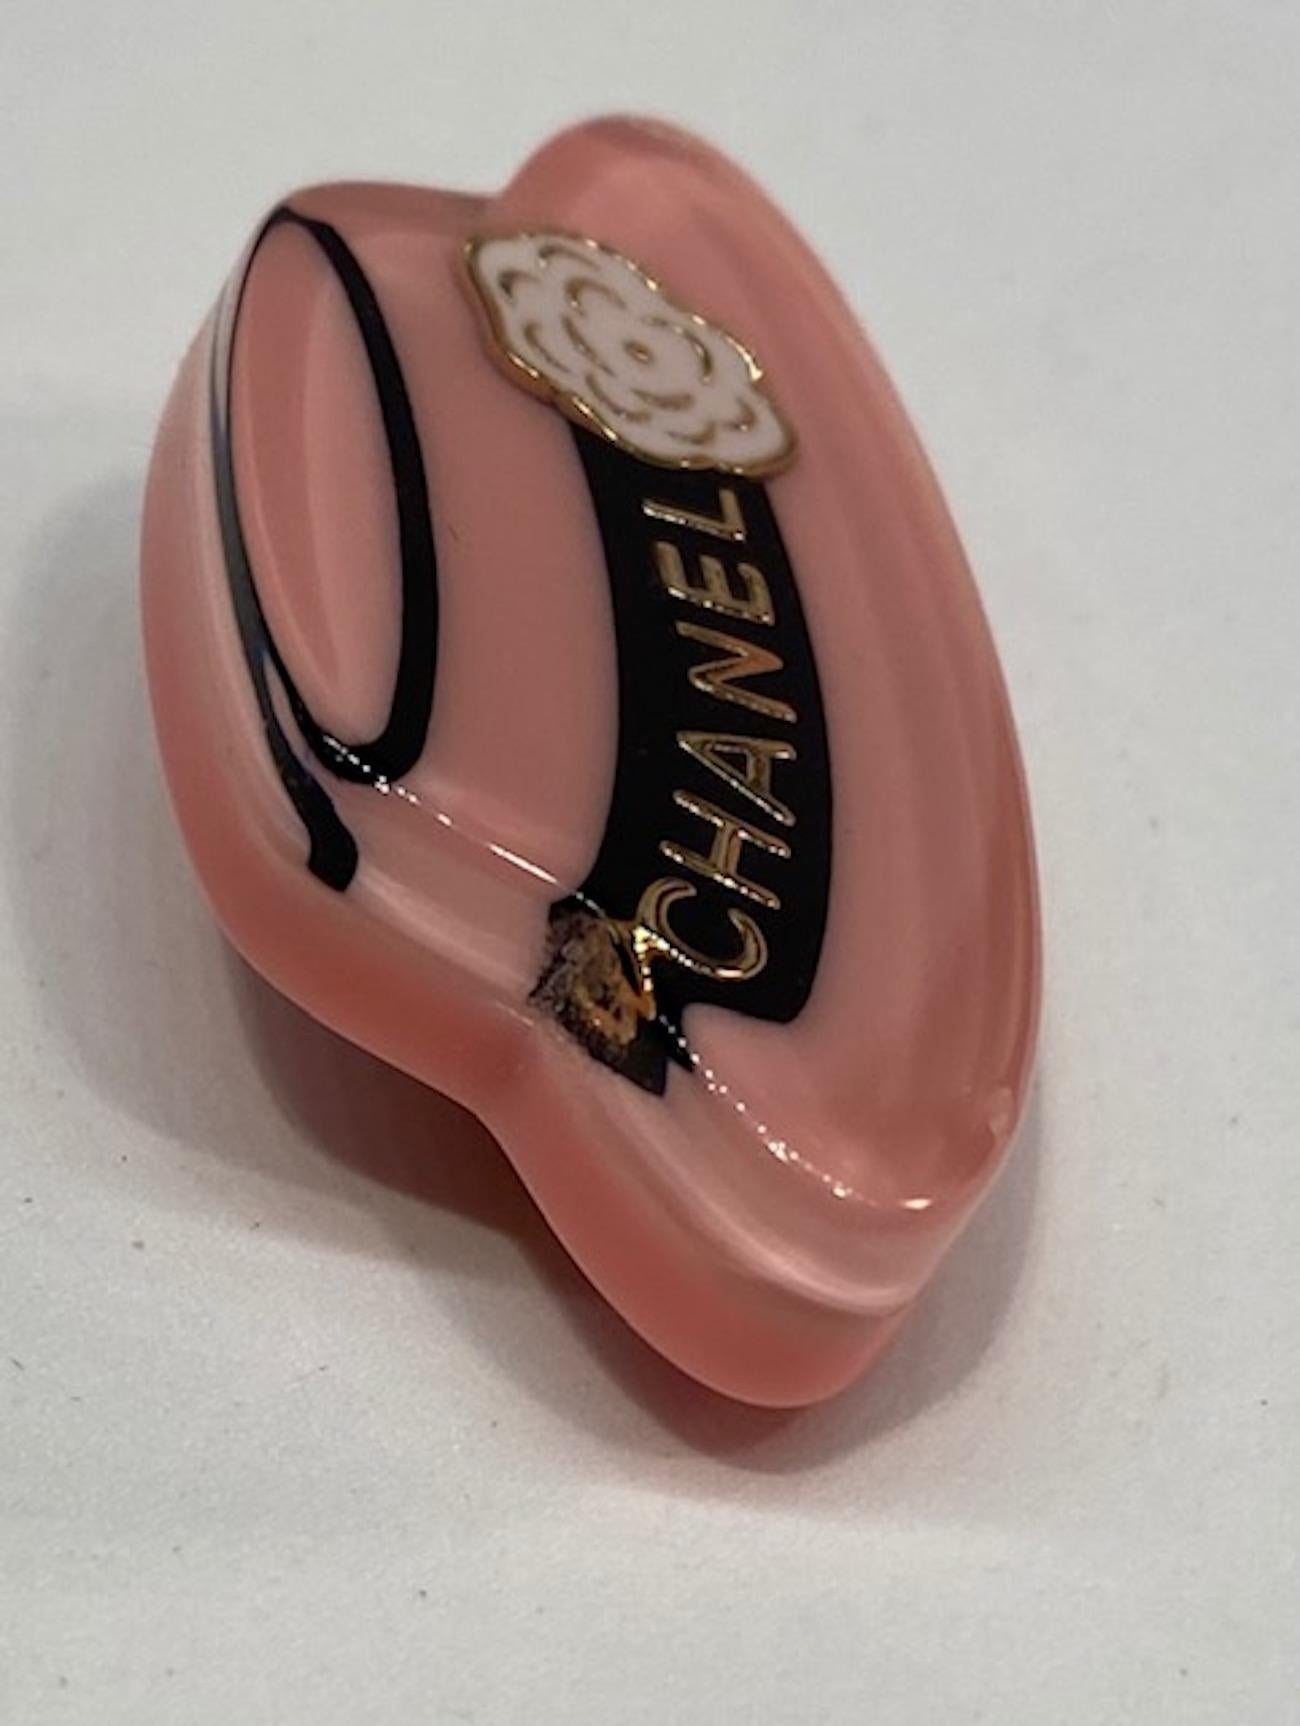 A charming 2018 spring collection lucite brooch of Coco Chanel's famous hat. She had several versions of this brimmed hat for herself and her collections. The lucite is 0.38 thick with the top half in clear and the bottom half in pink lucite.